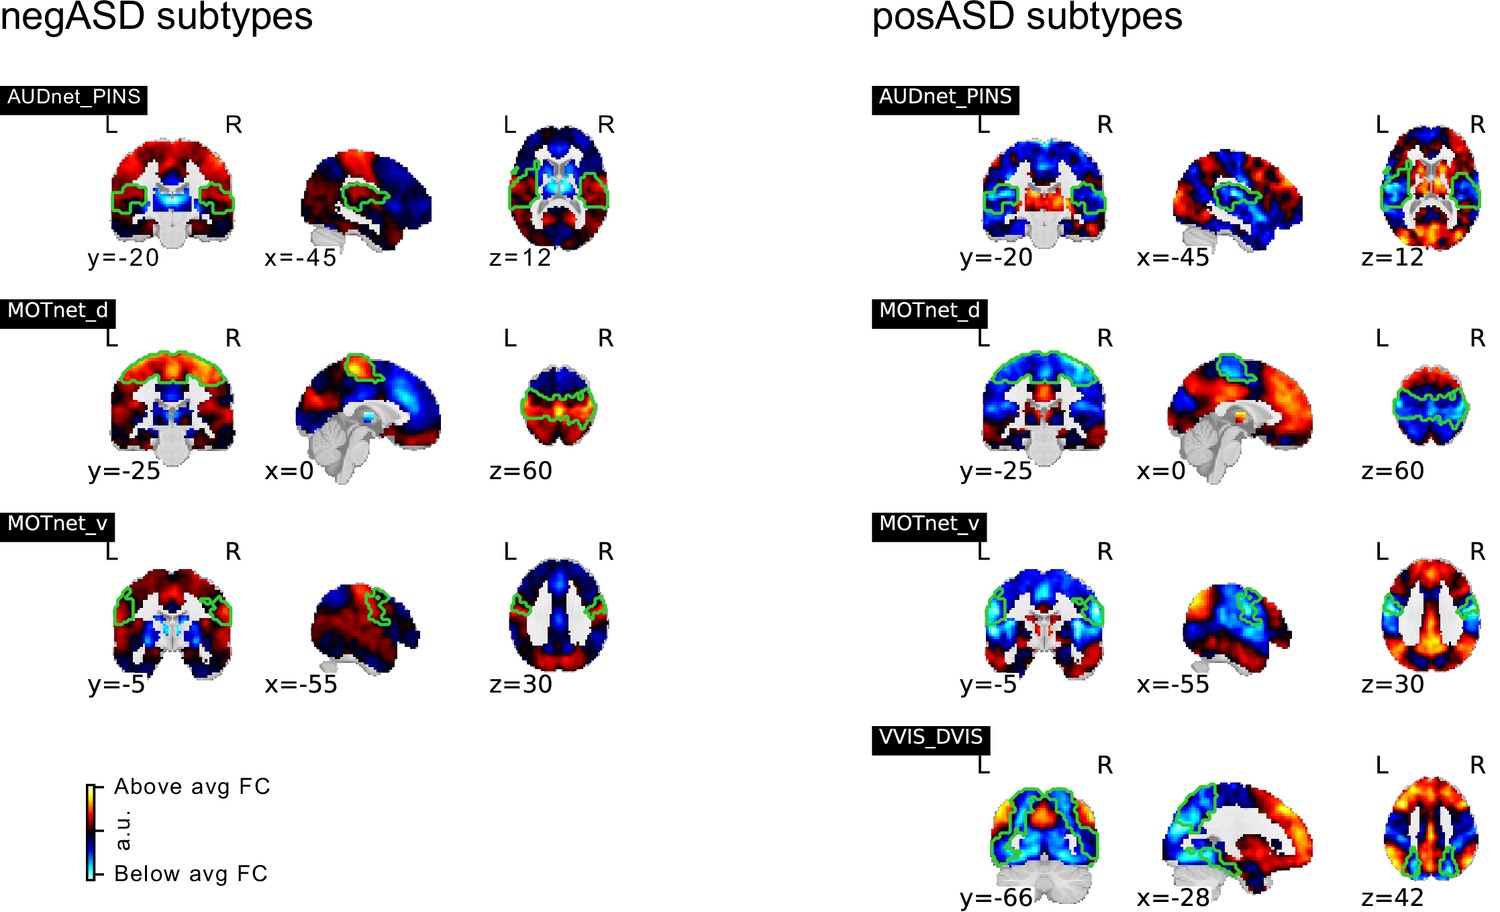 Verschrikking tarief Haarvaten Functional connectivity subtypes associate robustly with ASD diagnosis |  eLife